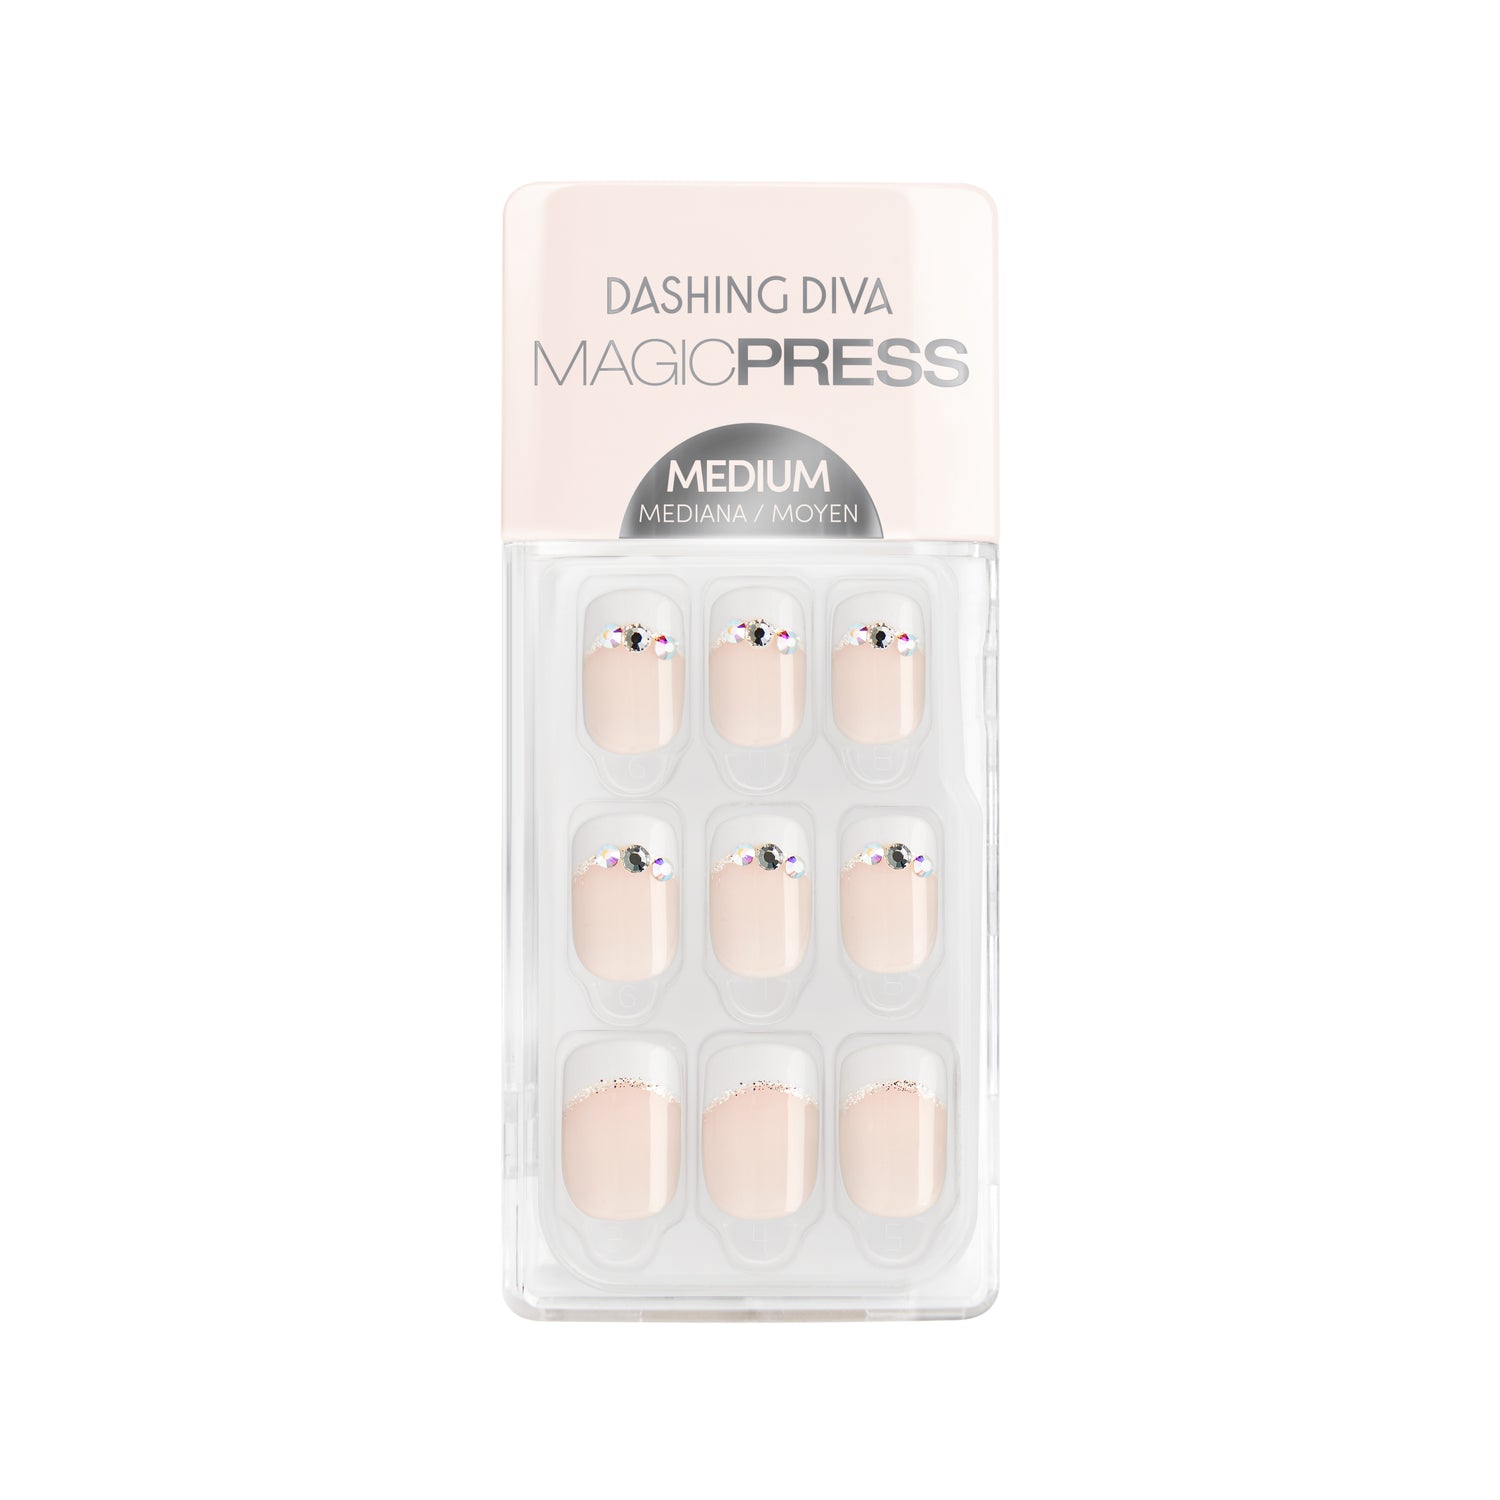  Medium length, square shape, glossy finish. Semi-sheer nude press-on gel nails featuring white french tips with rhinestones and silver foil detailing.